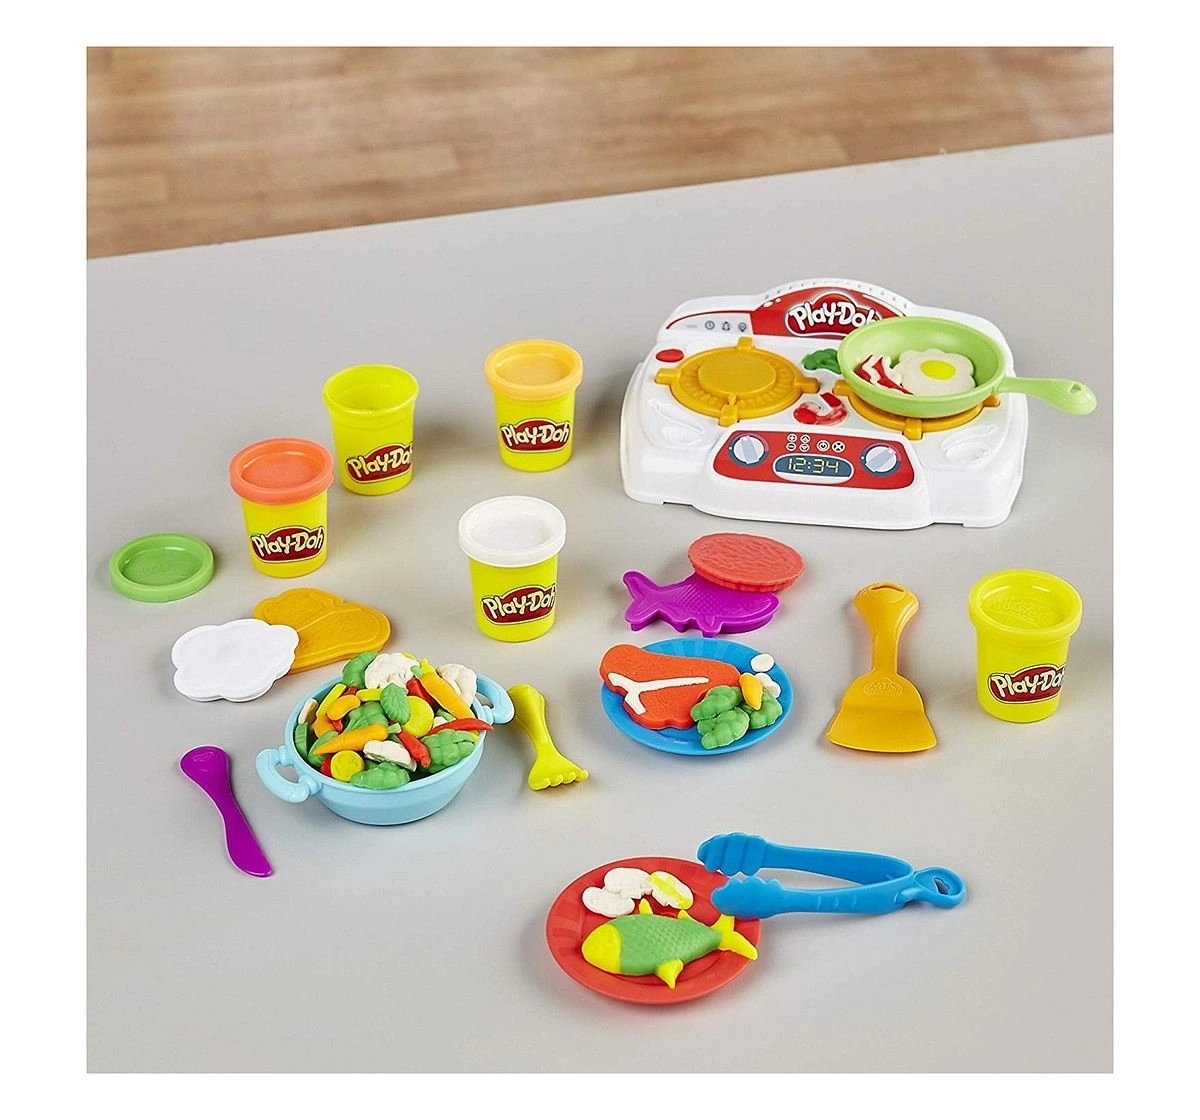  Play-Doh Kitchen Creations Sizzlin' Stovetop Clay & Dough for Kids age 3Y+ 